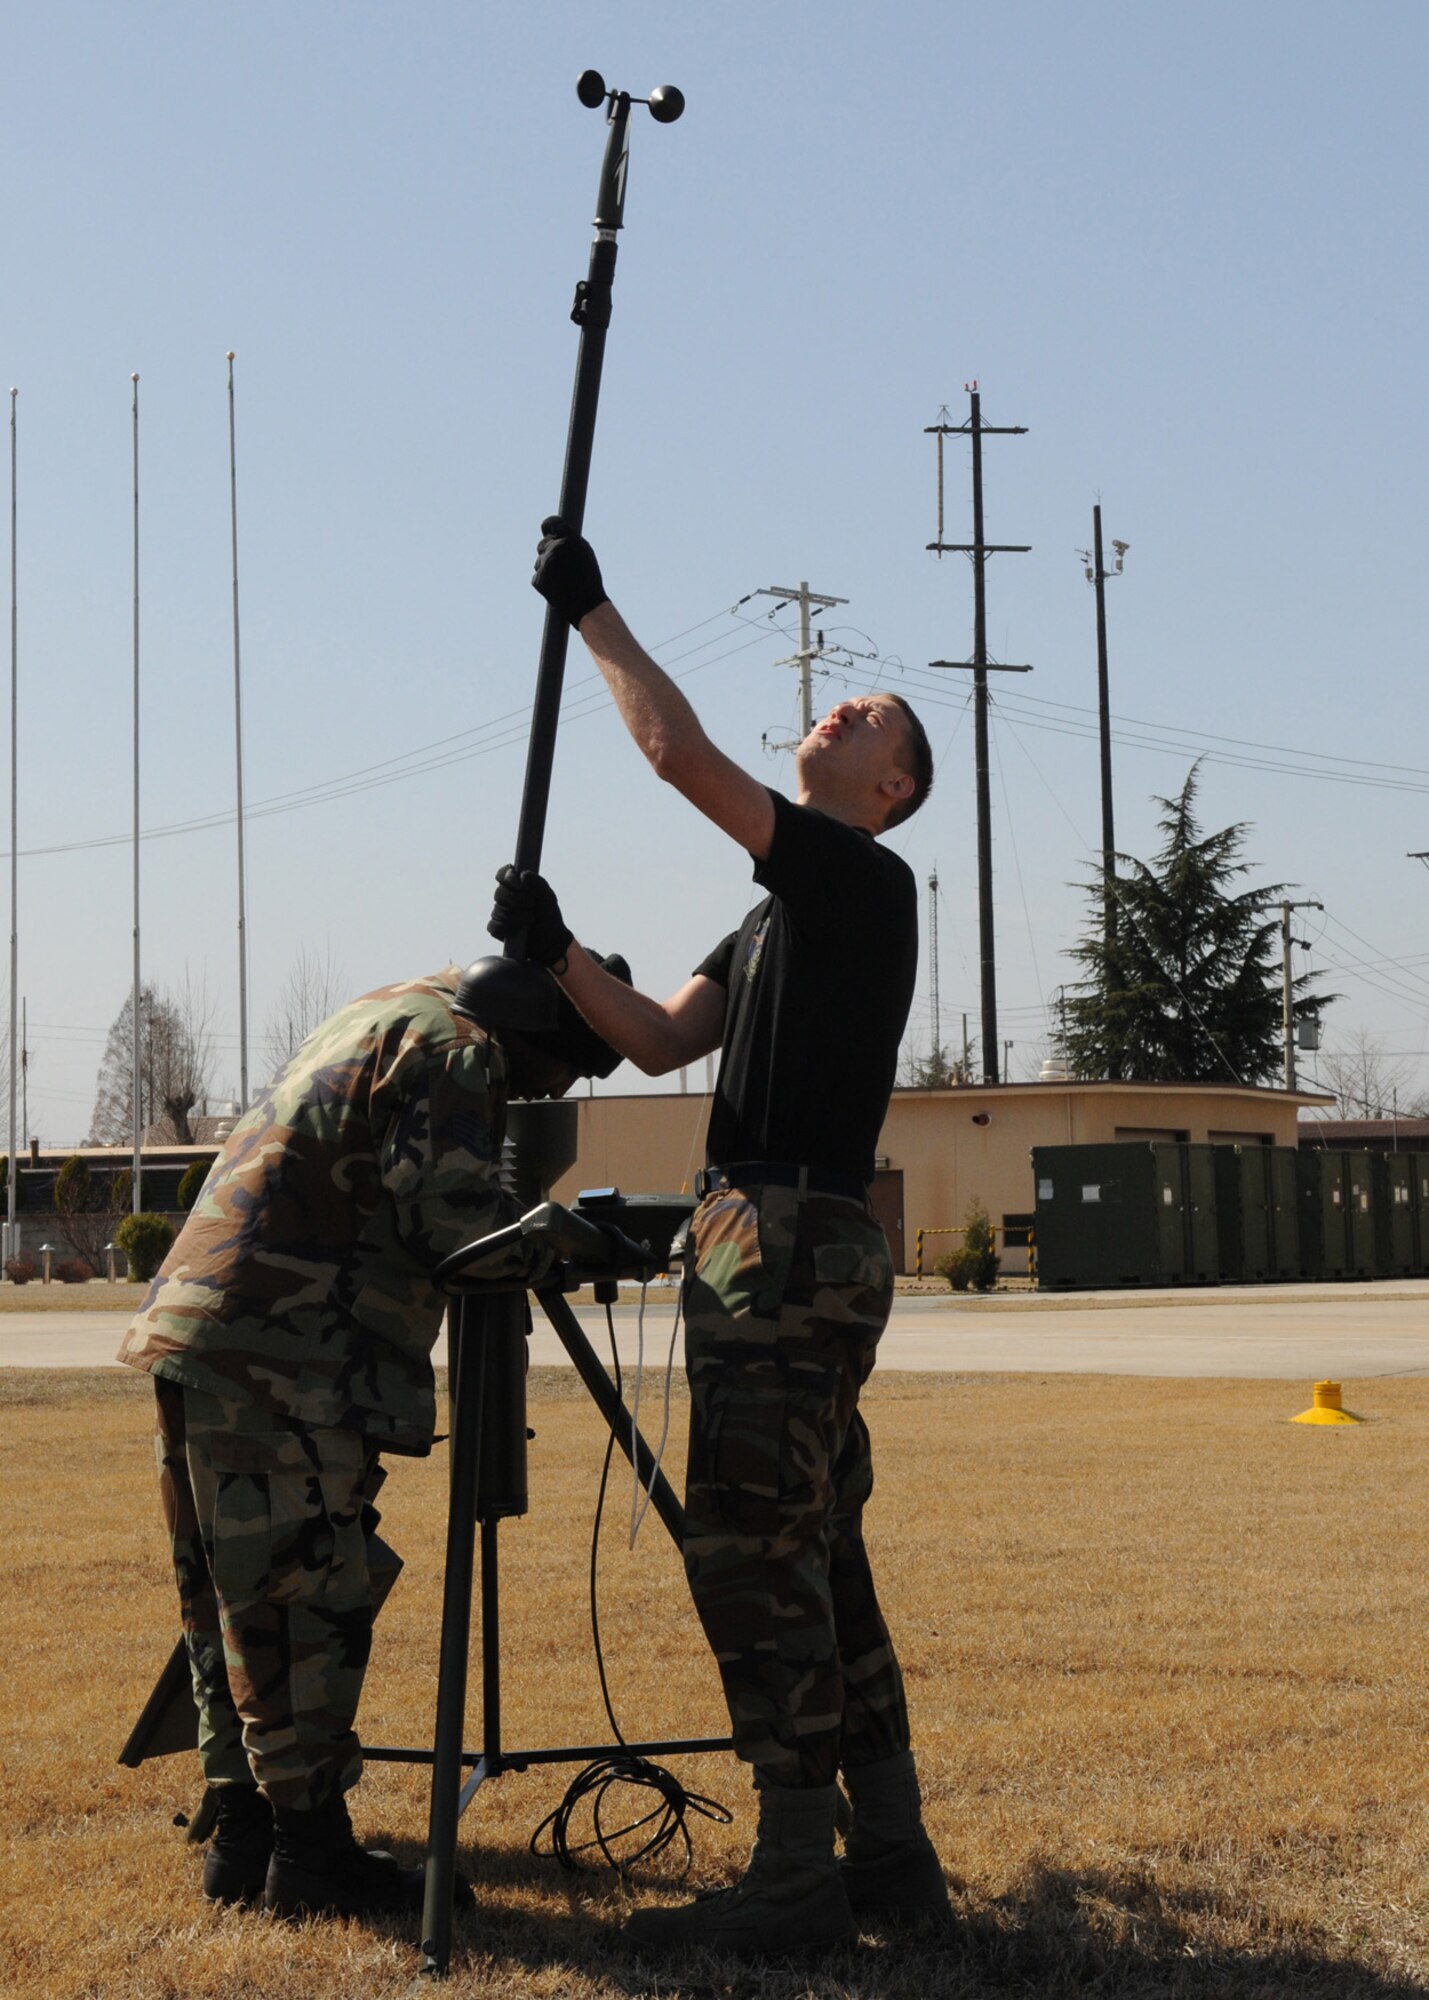 DAEGU AIR BASE, Republic of Korea -- Staff Sgt. Roderic Jackson (left) and Senior Airman Steven Yount, both from the 353rd Operations Support Squadron Weather Flight, put up a TMQ-53 Tactical Weather Observation System here March 14. The system reads key weather indicators used to provide accurate forecasts that will be used during the group's annual operational readiness exercise which affords unit members an opportunity to practice wartime skills necessary for their ability to survive and operate. The 353rd Special Operations Group is the focal point for all U.S. Air Force special operations activities throughout the U.S. Pacific Command theater. (U.S. Air Force photo by Tech. Sgt. Aaron Cram)
